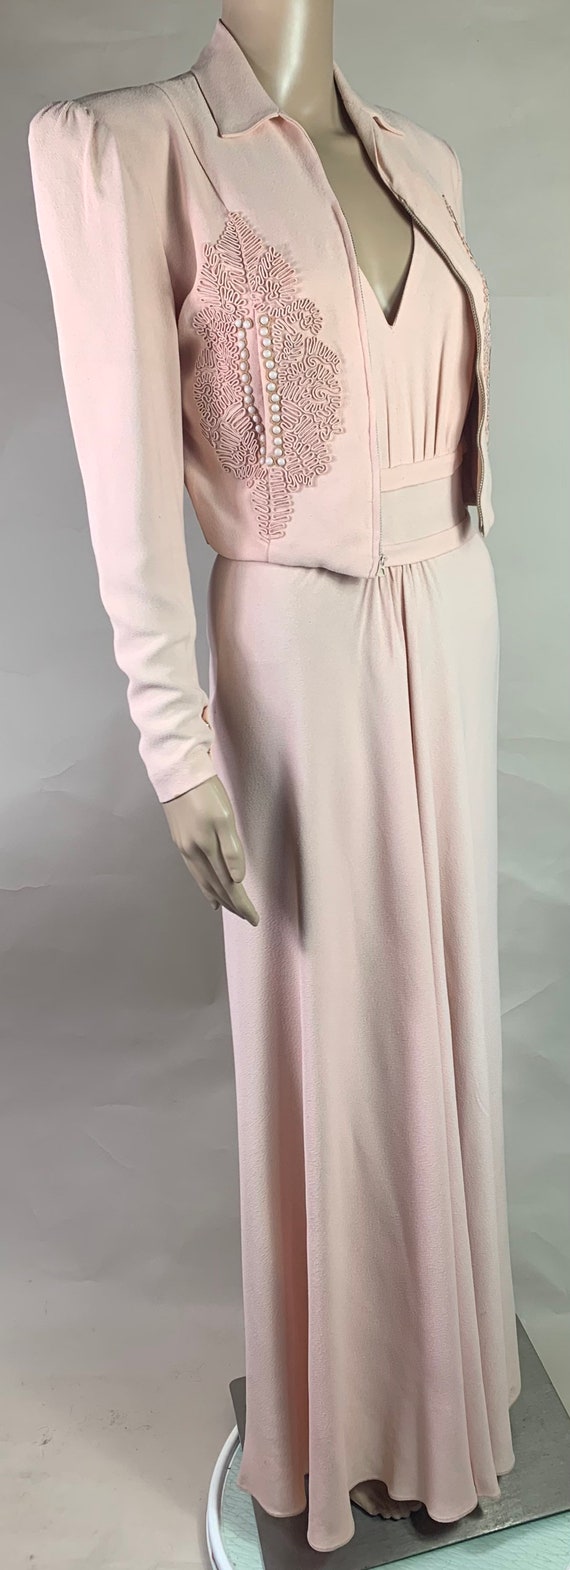 Vintage 1940s Soft Pink Long Dress and Jacket an … - image 2